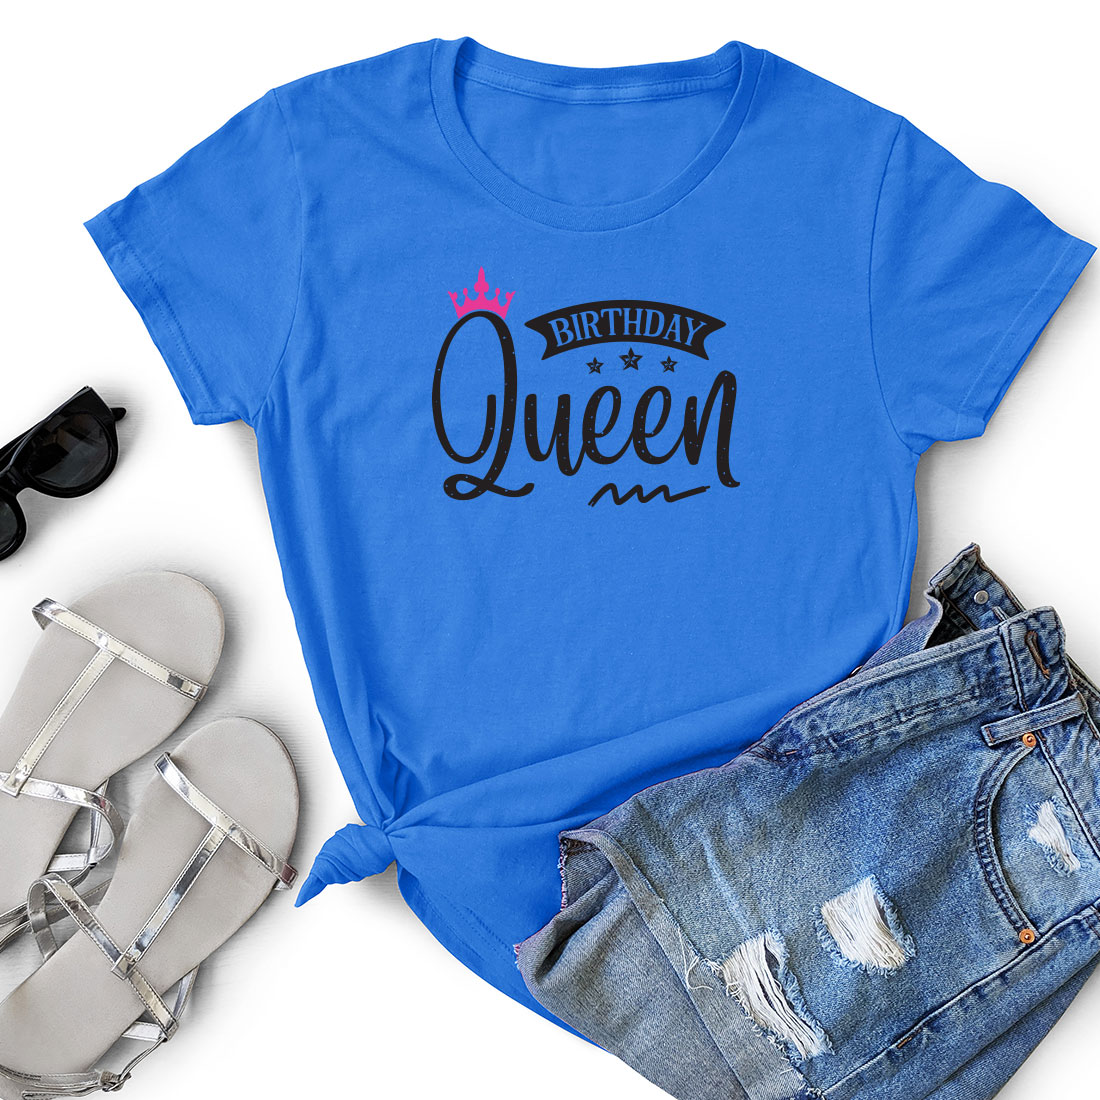 Women's birthday t - shirt with the words queen printed on it.